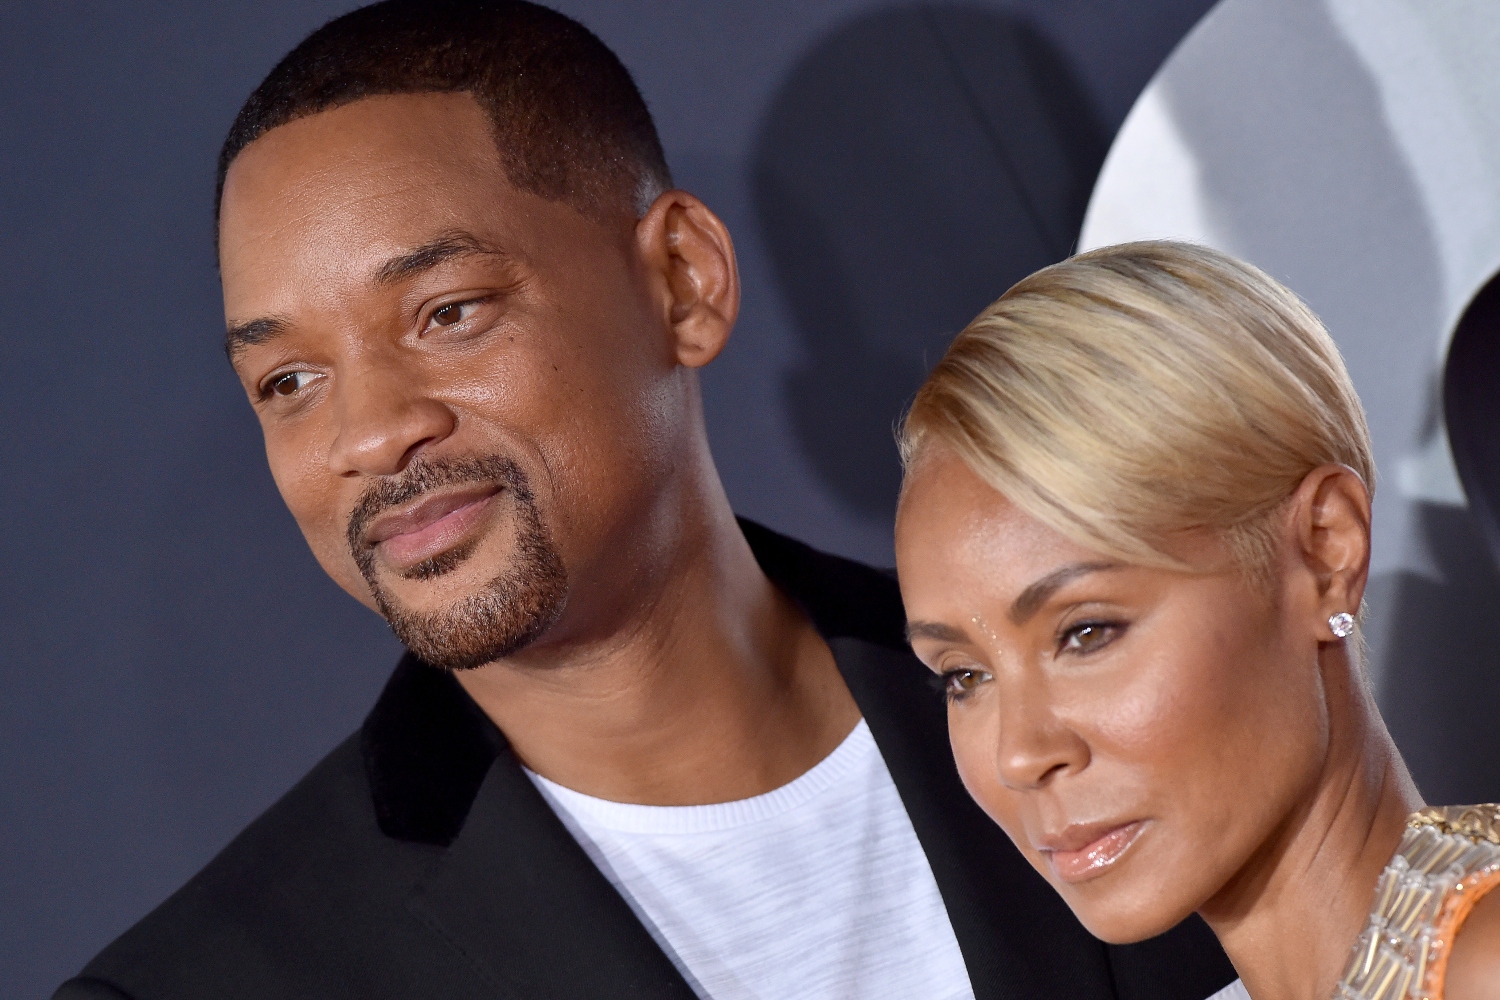 Will Smith and wife Jada Pinkett Smith pose together at Paramount Pictures' Premiere of "Gemini Man" on October 06, 2019 in Hollywood, California.